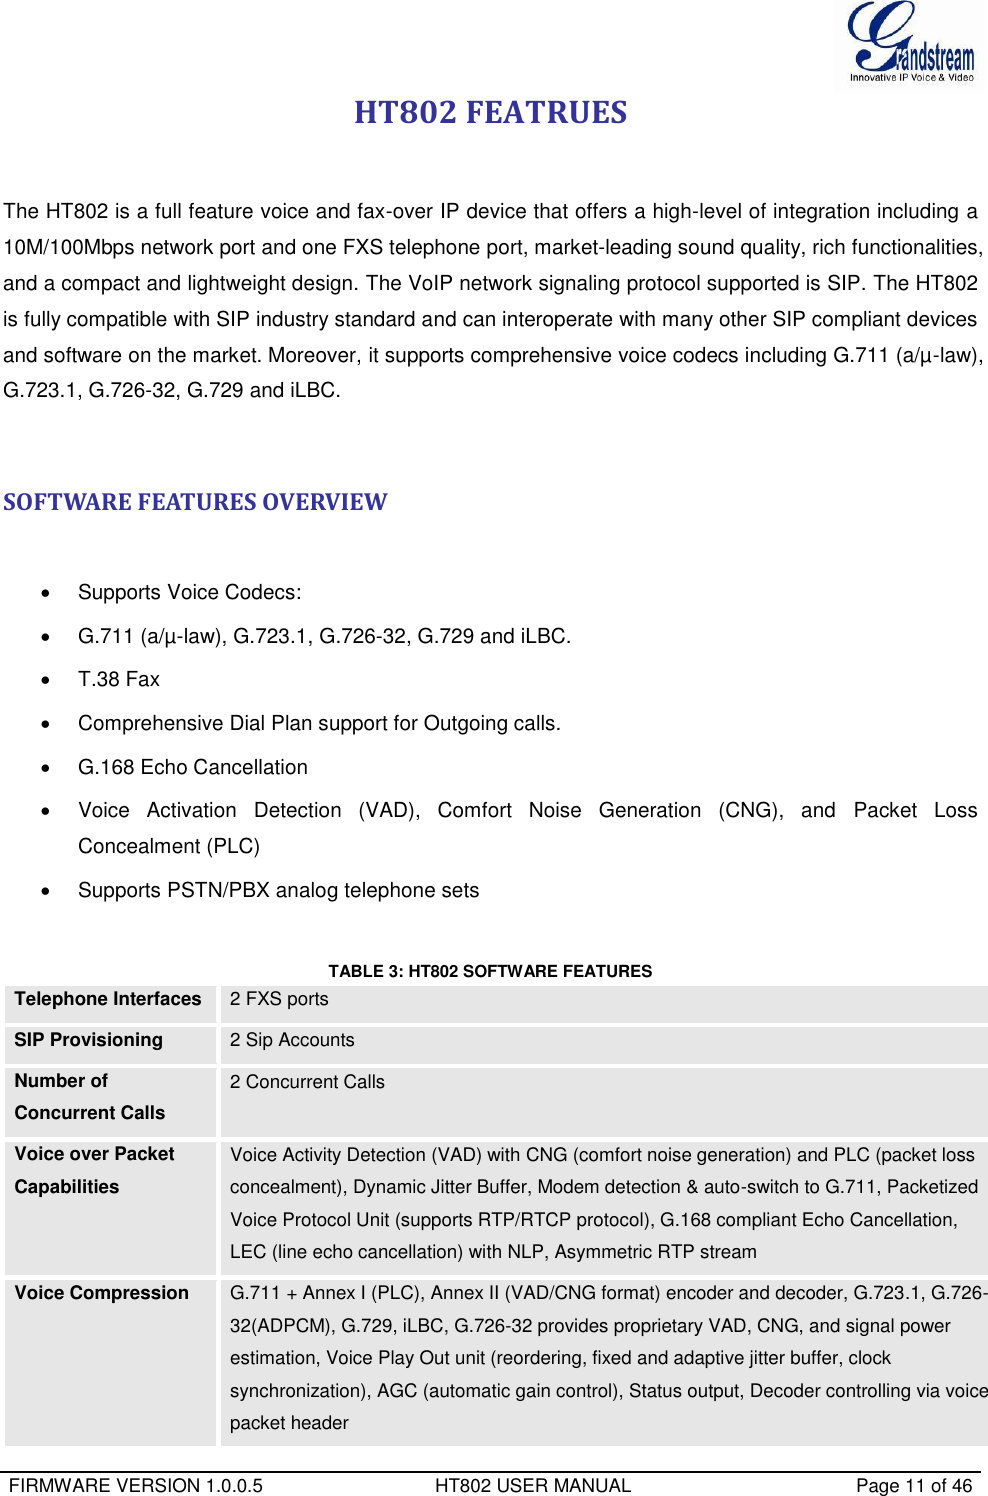  FIRMWARE VERSION 1.0.0.5                                 HT802 USER MANUAL                                           Page 11 of 46  HT802 FEATRUES  The HT802 is a full feature voice and fax-over IP device that offers a high-level of integration including a 10M/100Mbps network port and one FXS telephone port, market-leading sound quality, rich functionalities, and a compact and lightweight design. The VoIP network signaling protocol supported is SIP. The HT802 is fully compatible with SIP industry standard and can interoperate with many other SIP compliant devices and software on the market. Moreover, it supports comprehensive voice codecs including G.711 (a/µ-law), G.723.1, G.726-32, G.729 and iLBC.   SOFTWARE FEATURES OVERVIEW    Supports Voice Codecs:    G.711 (a/µ-law), G.723.1, G.726-32, G.729 and iLBC.   T.38 Fax    Comprehensive Dial Plan support for Outgoing calls.   G.168 Echo Cancellation   Voice  Activation  Detection  (VAD),  Comfort  Noise  Generation  (CNG),  and  Packet  Loss Concealment (PLC)   Supports PSTN/PBX analog telephone sets  TABLE 3: HT802 SOFTWARE FEATURES Telephone Interfaces 2 FXS ports SIP Provisioning 2 Sip Accounts Number of Concurrent Calls 2 Concurrent Calls Voice over Packet Capabilities Voice Activity Detection (VAD) with CNG (comfort noise generation) and PLC (packet loss concealment), Dynamic Jitter Buffer, Modem detection &amp; auto-switch to G.711, Packetized Voice Protocol Unit (supports RTP/RTCP protocol), G.168 compliant Echo Cancellation, LEC (line echo cancellation) with NLP, Asymmetric RTP stream Voice Compression G.711 + Annex I (PLC), Annex II (VAD/CNG format) encoder and decoder, G.723.1, G.726-32(ADPCM), G.729, iLBC, G.726-32 provides proprietary VAD, CNG, and signal power estimation, Voice Play Out unit (reordering, fixed and adaptive jitter buffer, clock synchronization), AGC (automatic gain control), Status output, Decoder controlling via voice packet header 